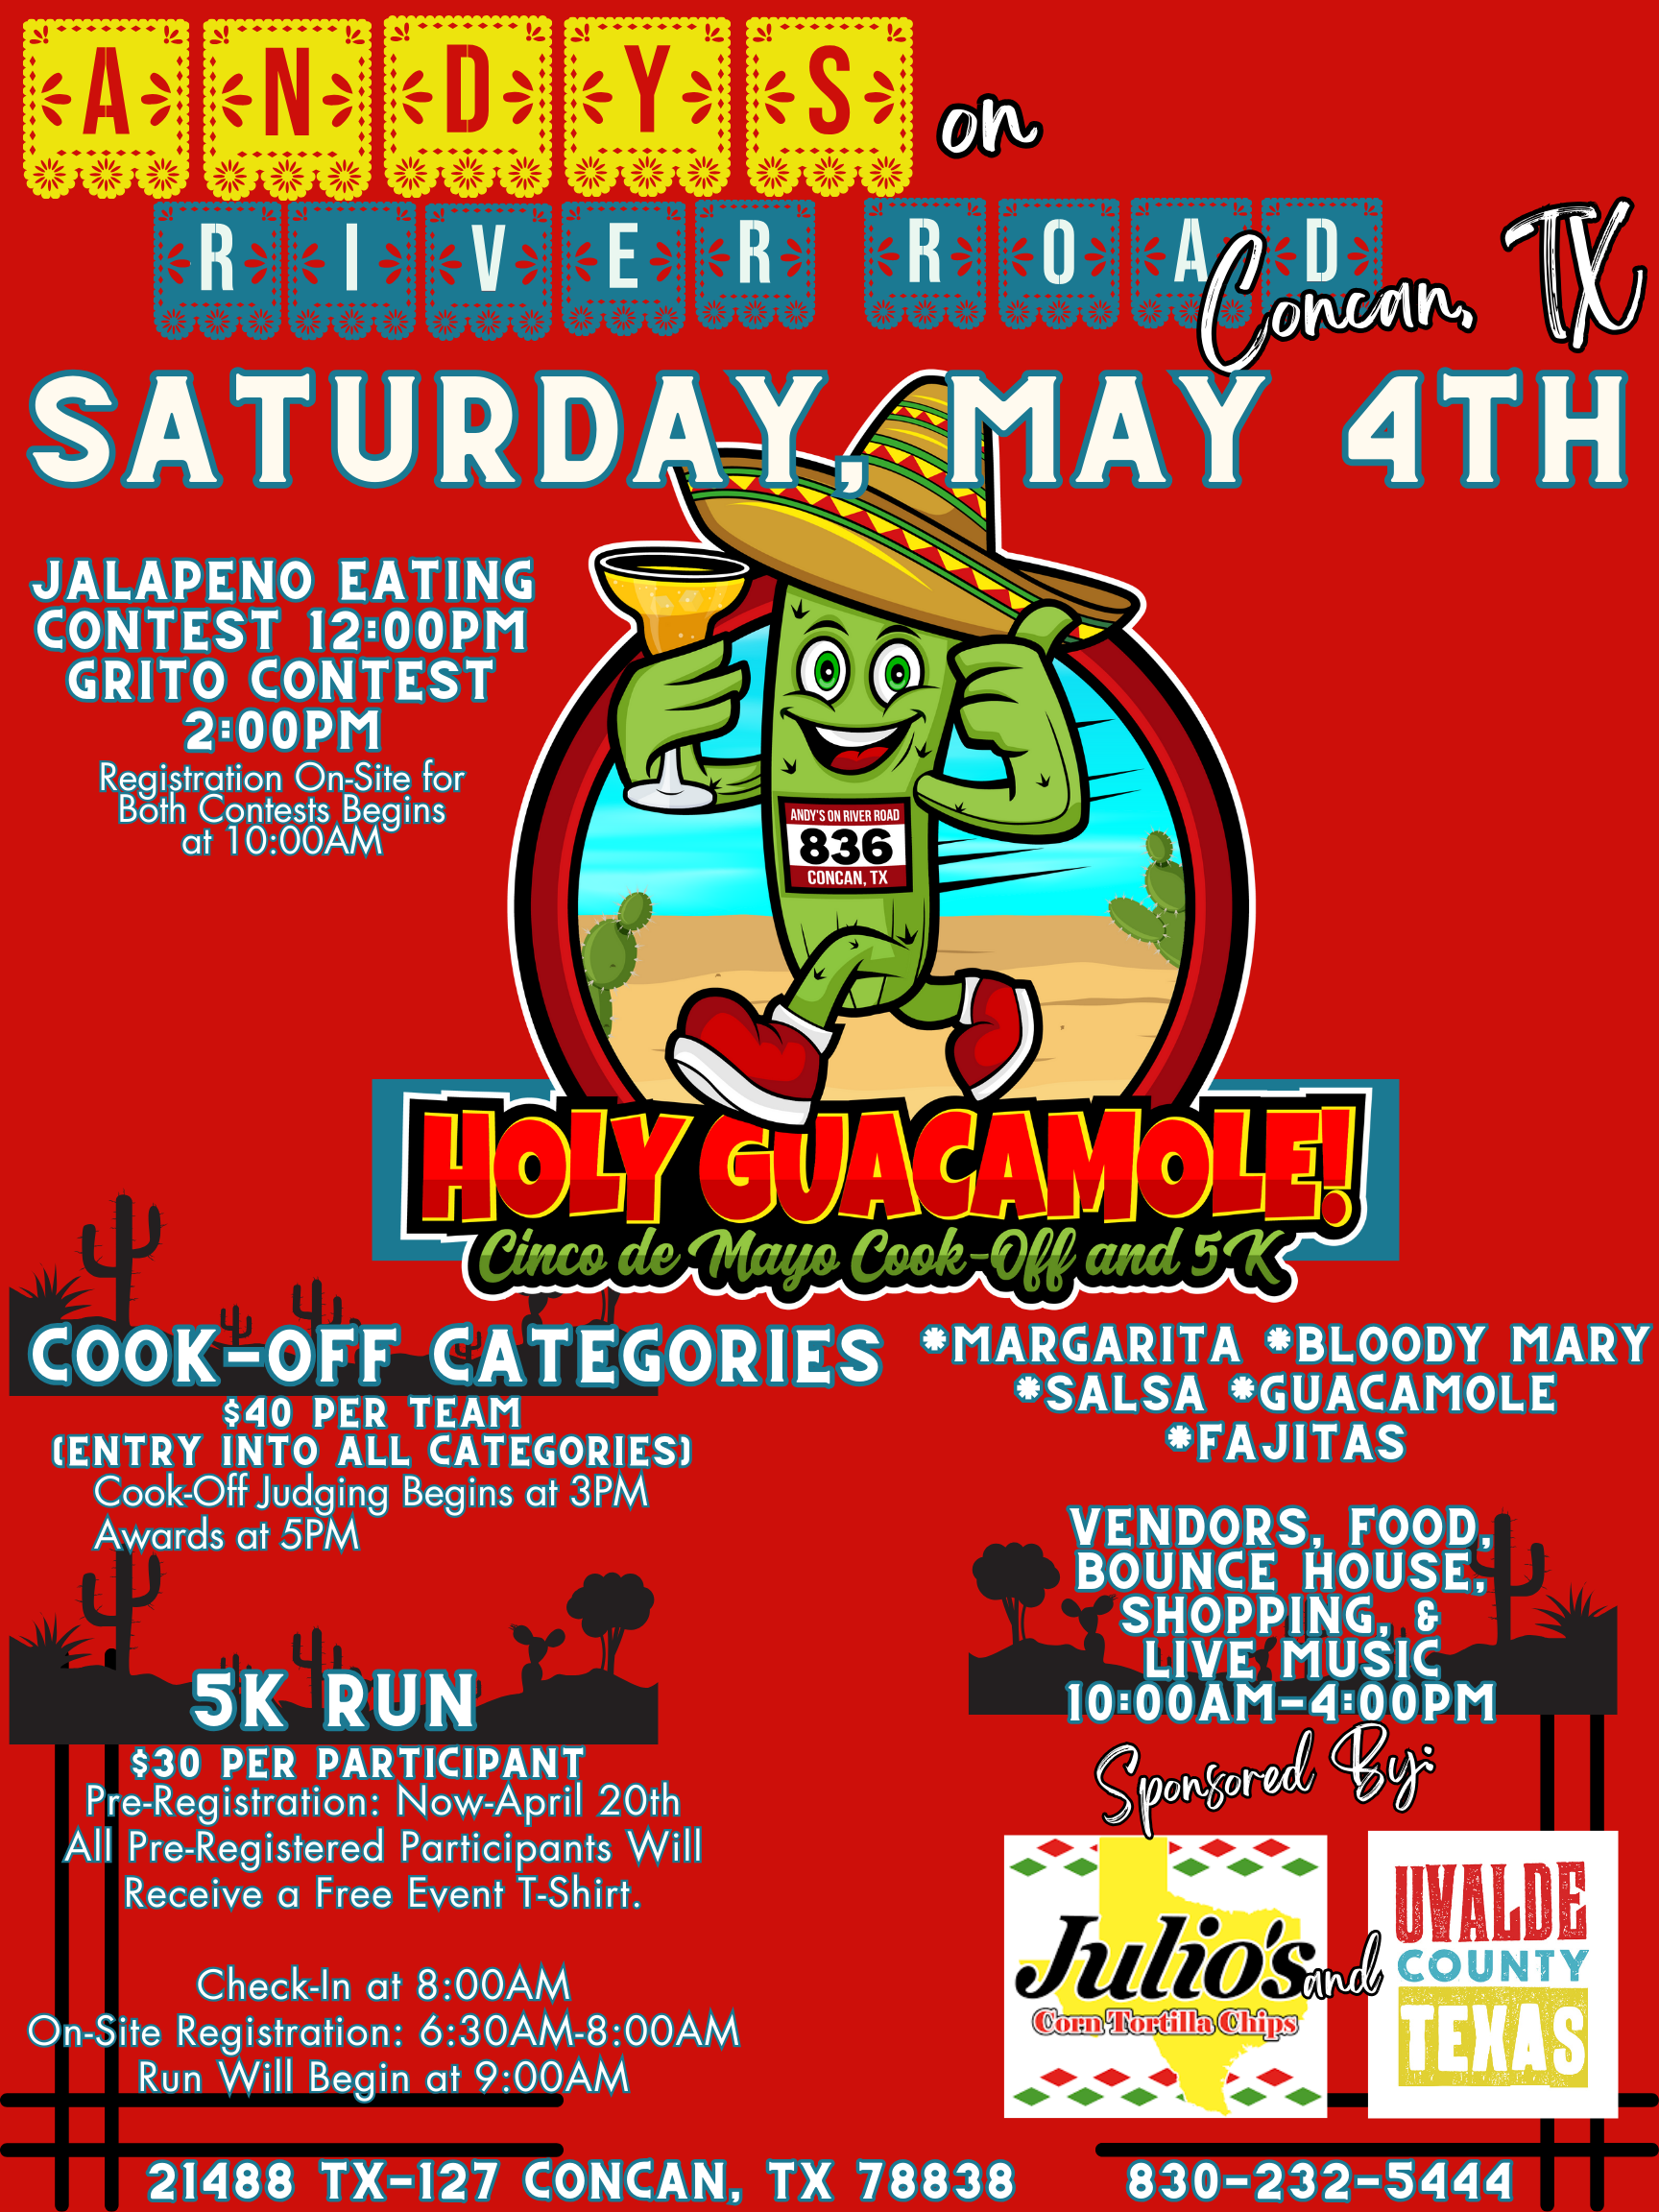 Art for Holy Guacamole Cinco De Mayo Cook Off and 5K by Andy's On River Road